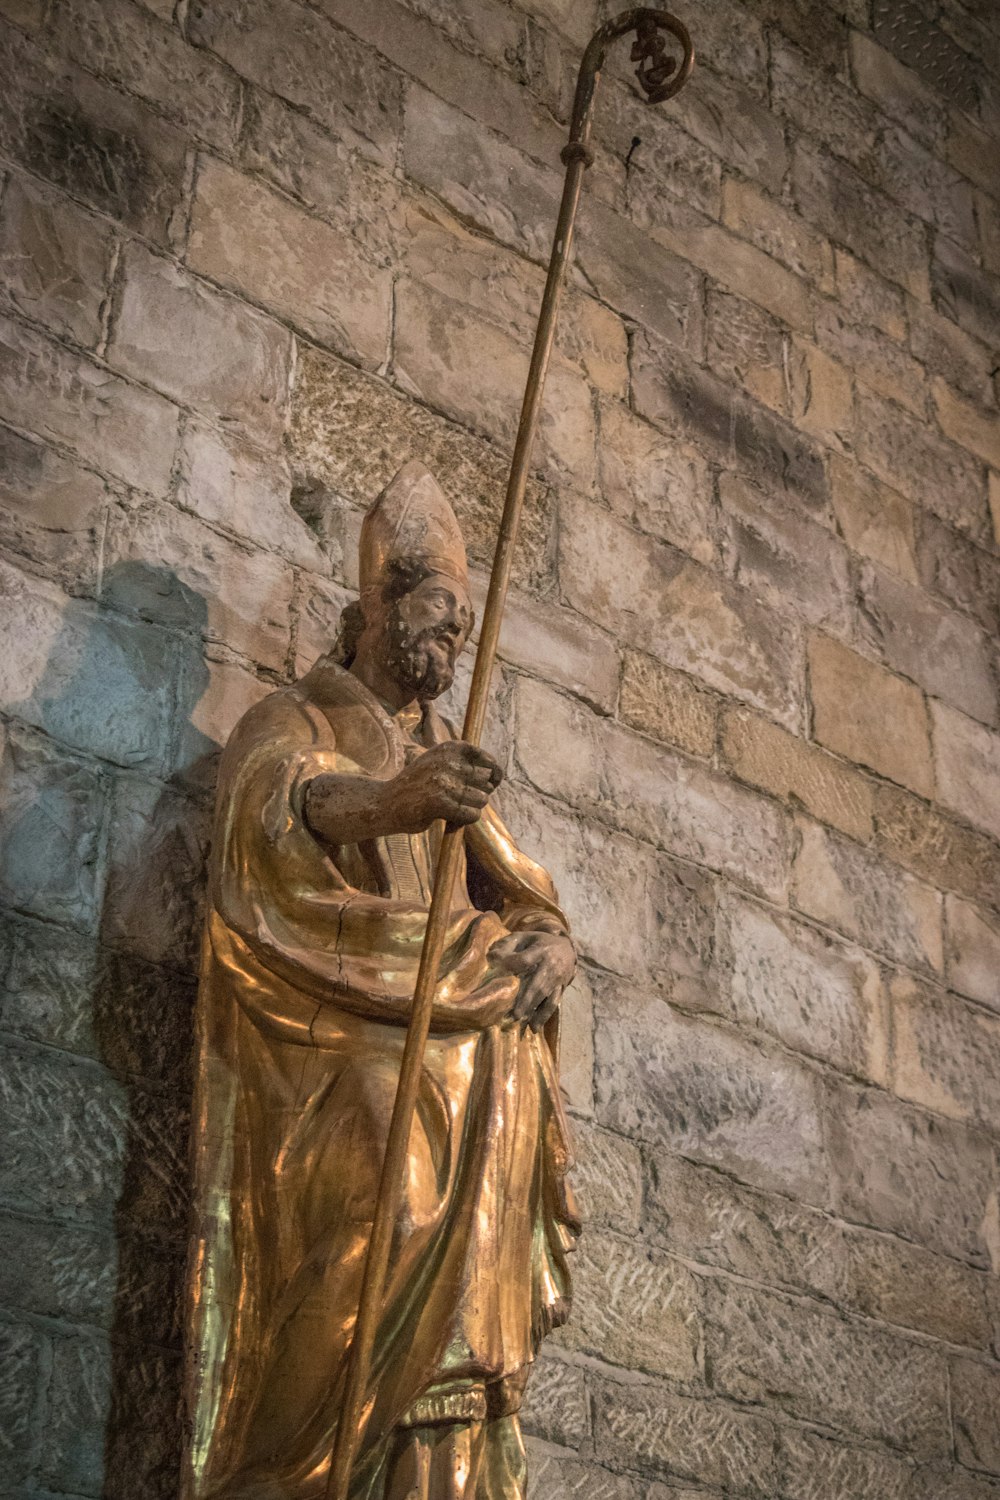 a statue of a man holding a staff in front of a brick wall